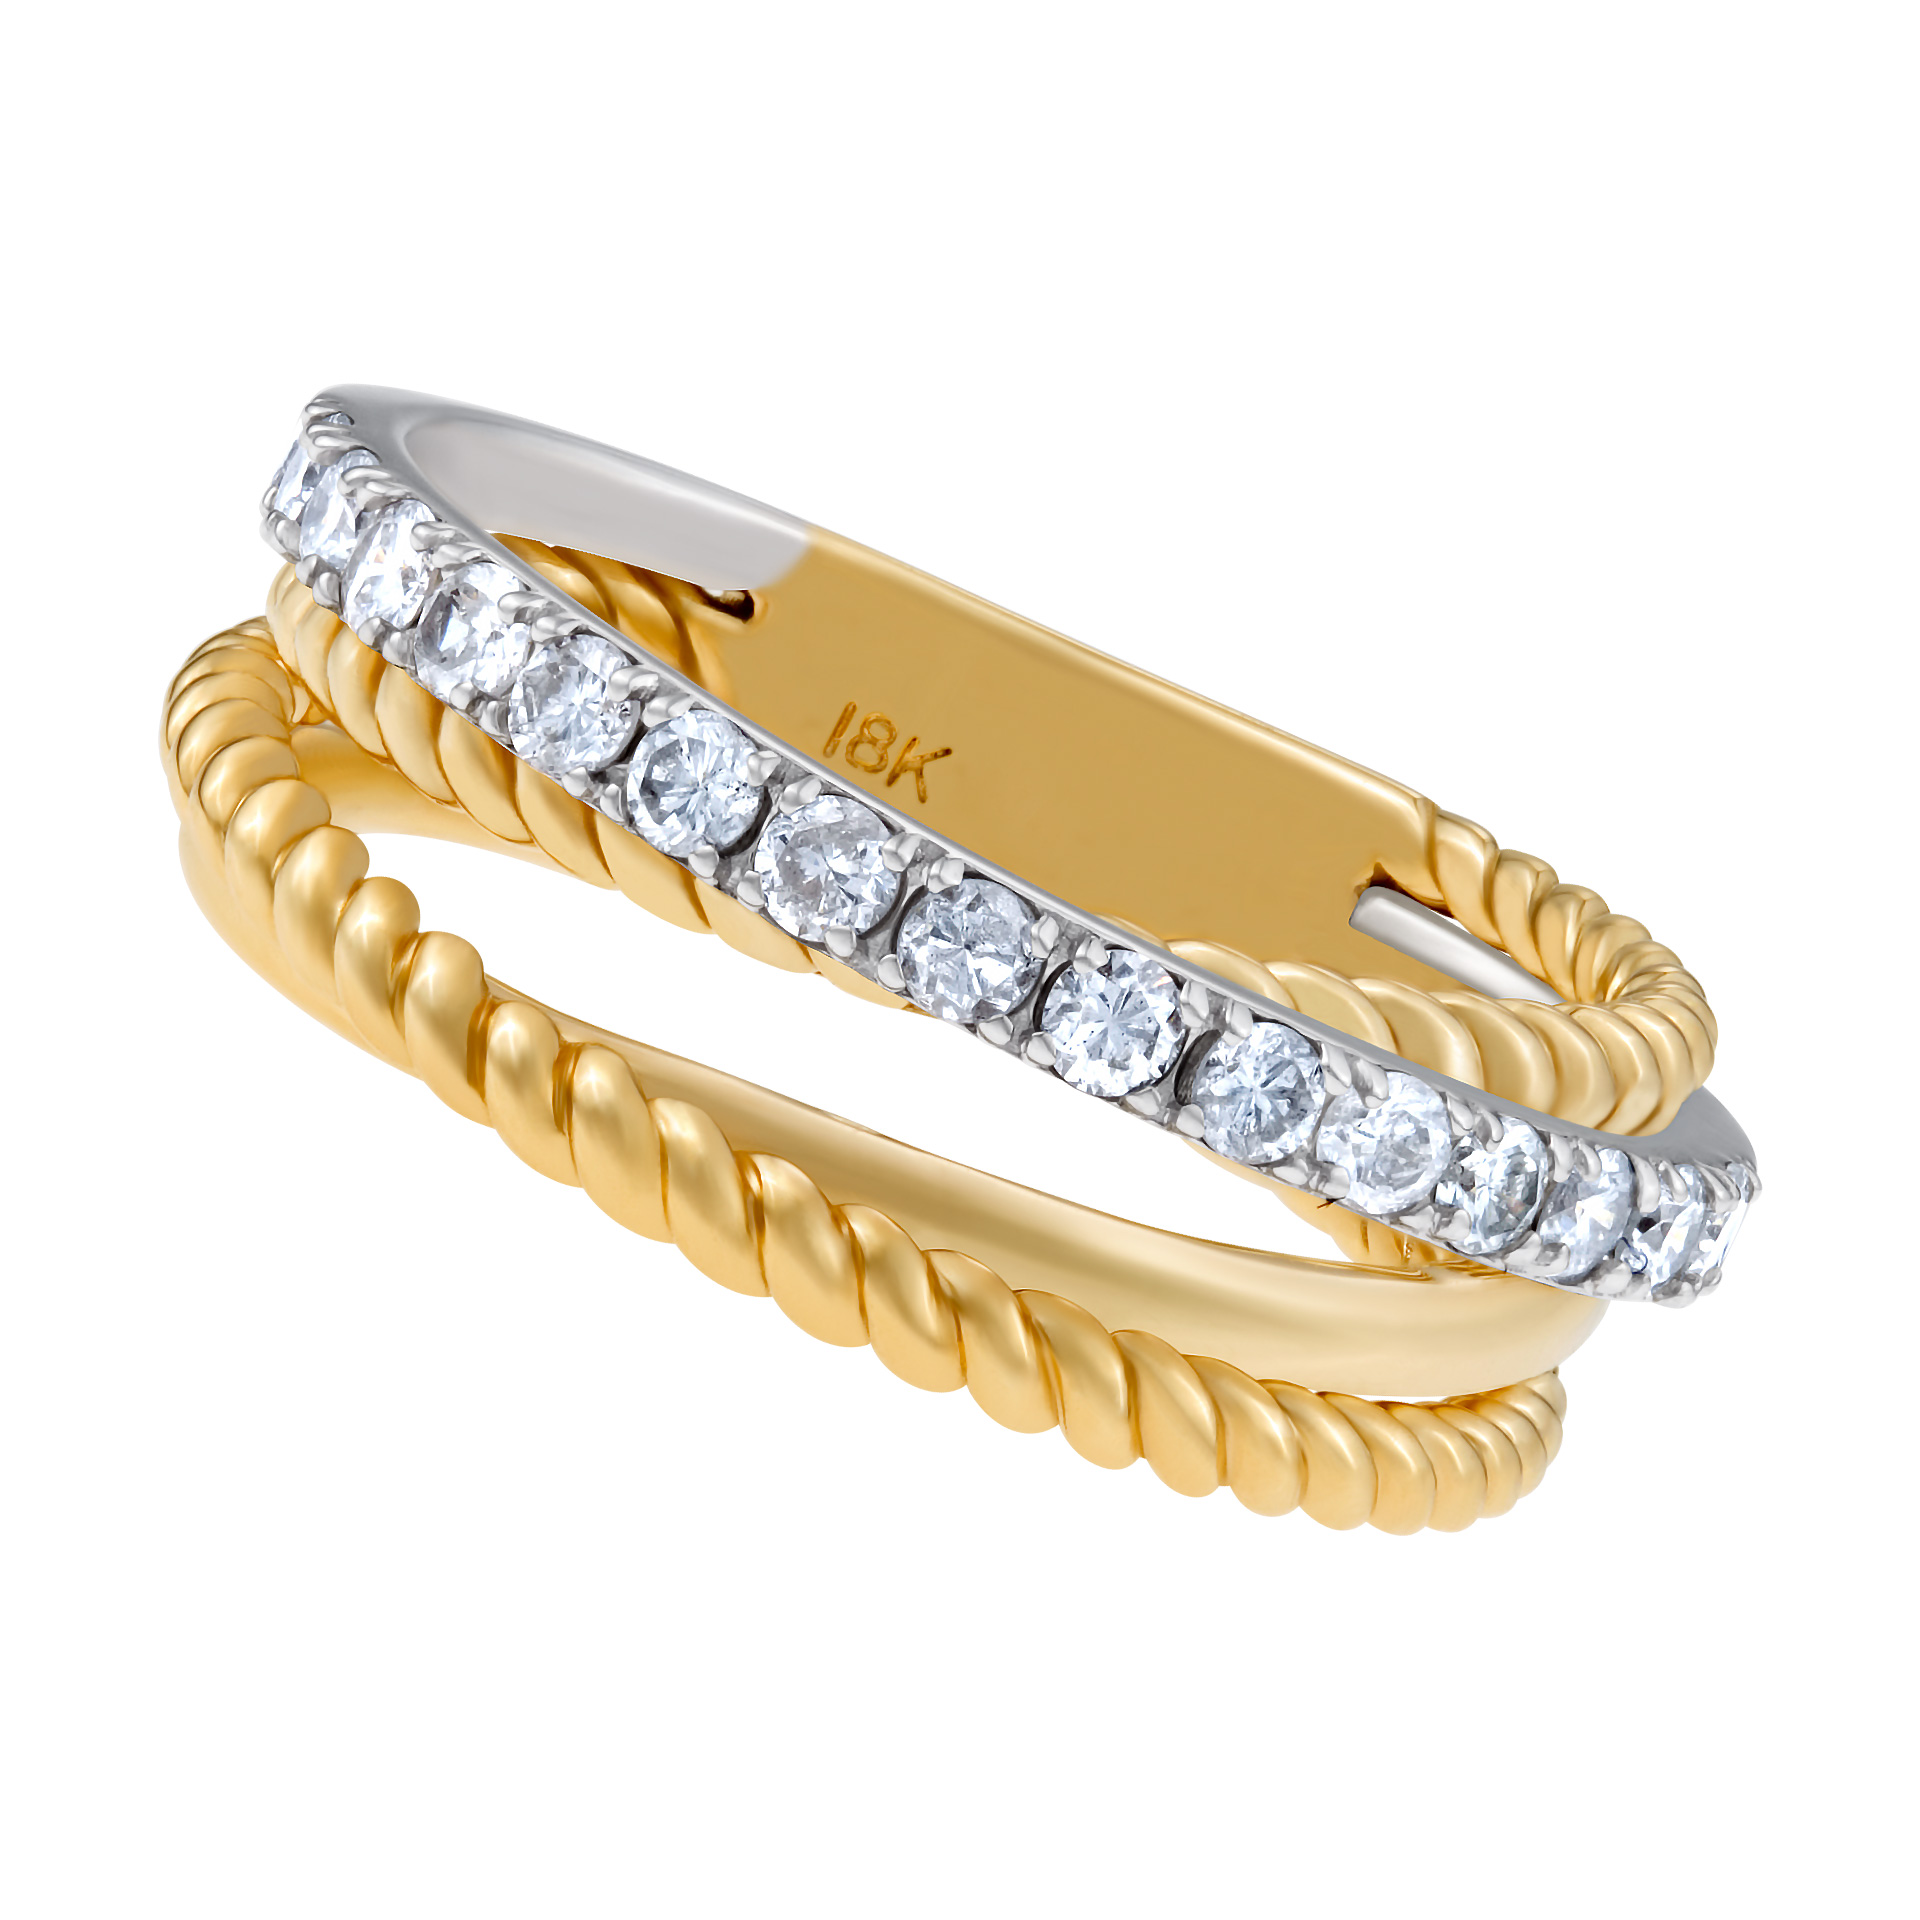 Modern & stylish crossover in 18k white & yellow diamond band with 0.44 carats image 1